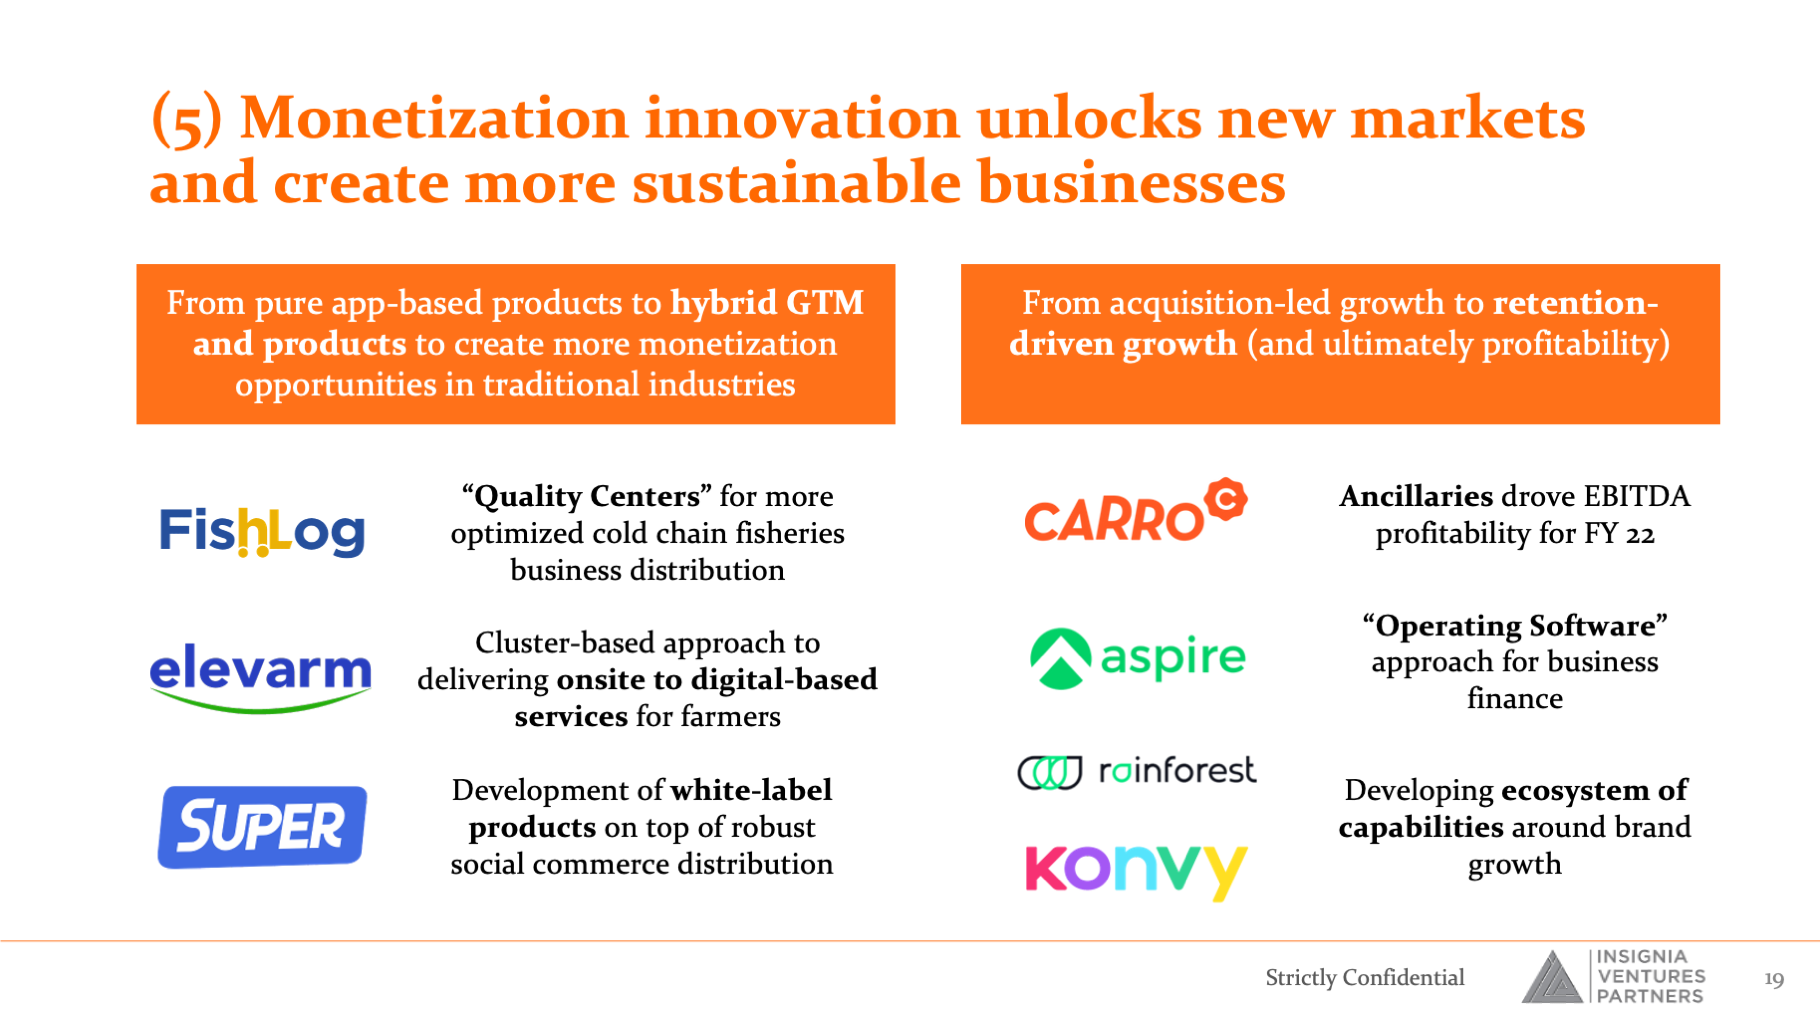 (5) Monetization innovation unlocks new markets and create more sustainable businesses